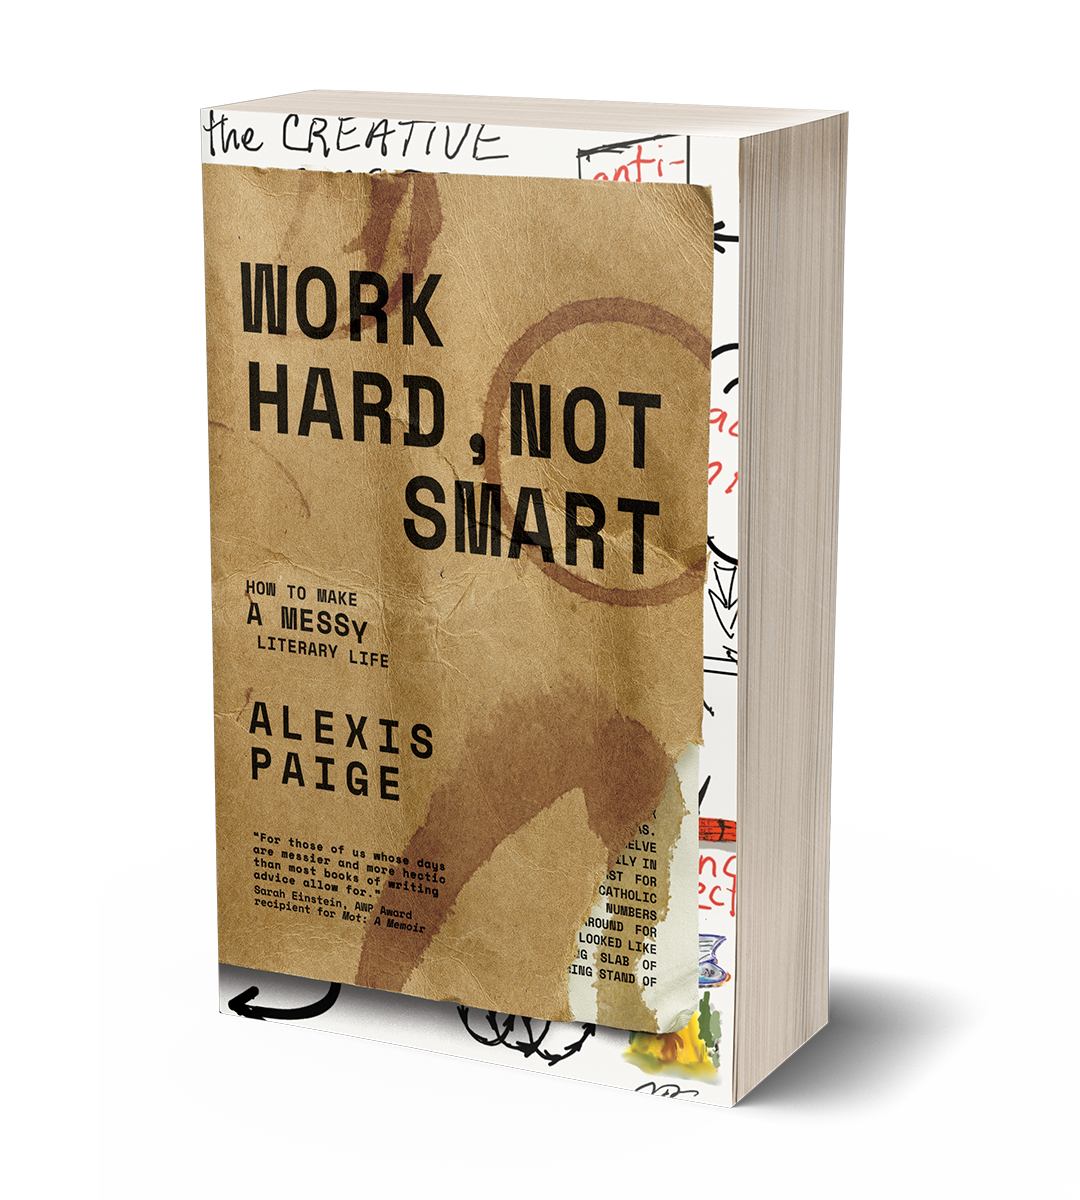 Work Hard, Not Smart by Alexis Paige